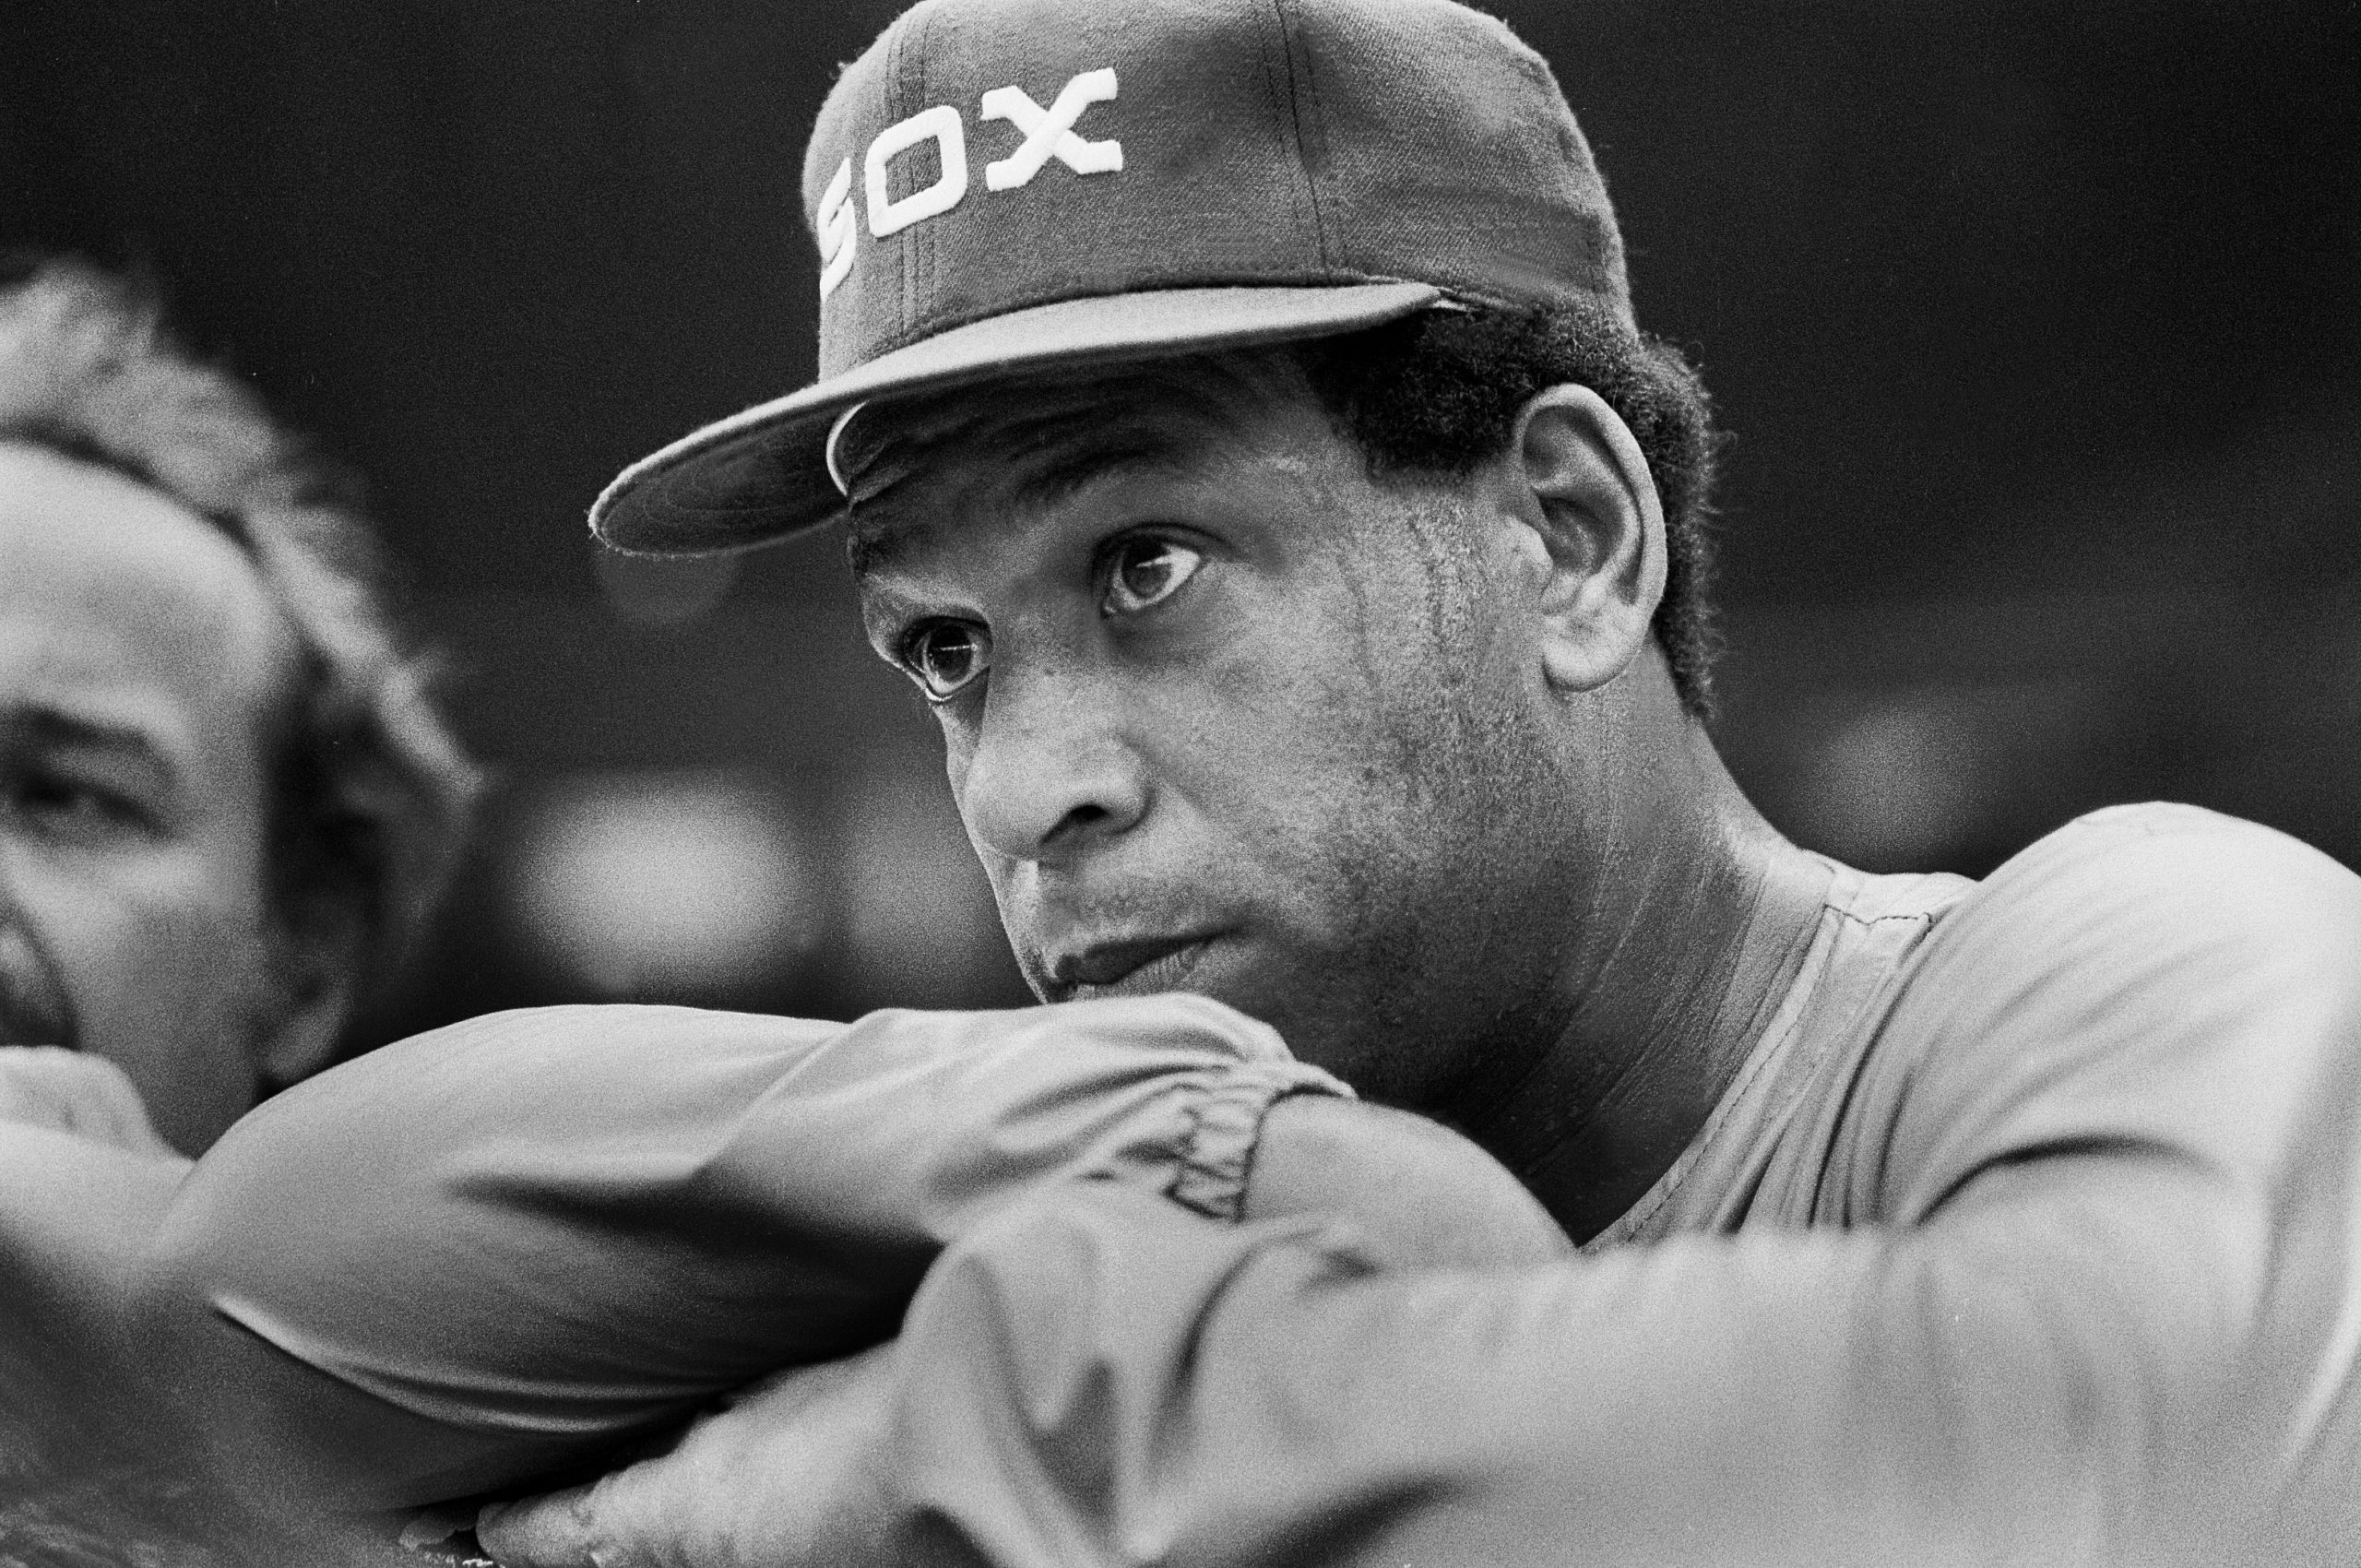 Orlando Cepeda, hitting coach of then Chicago White Sox at Comiskey Park in Chicago, Illinois, July 14, 1980.(Photo by Paul Natkin/Getty Images)